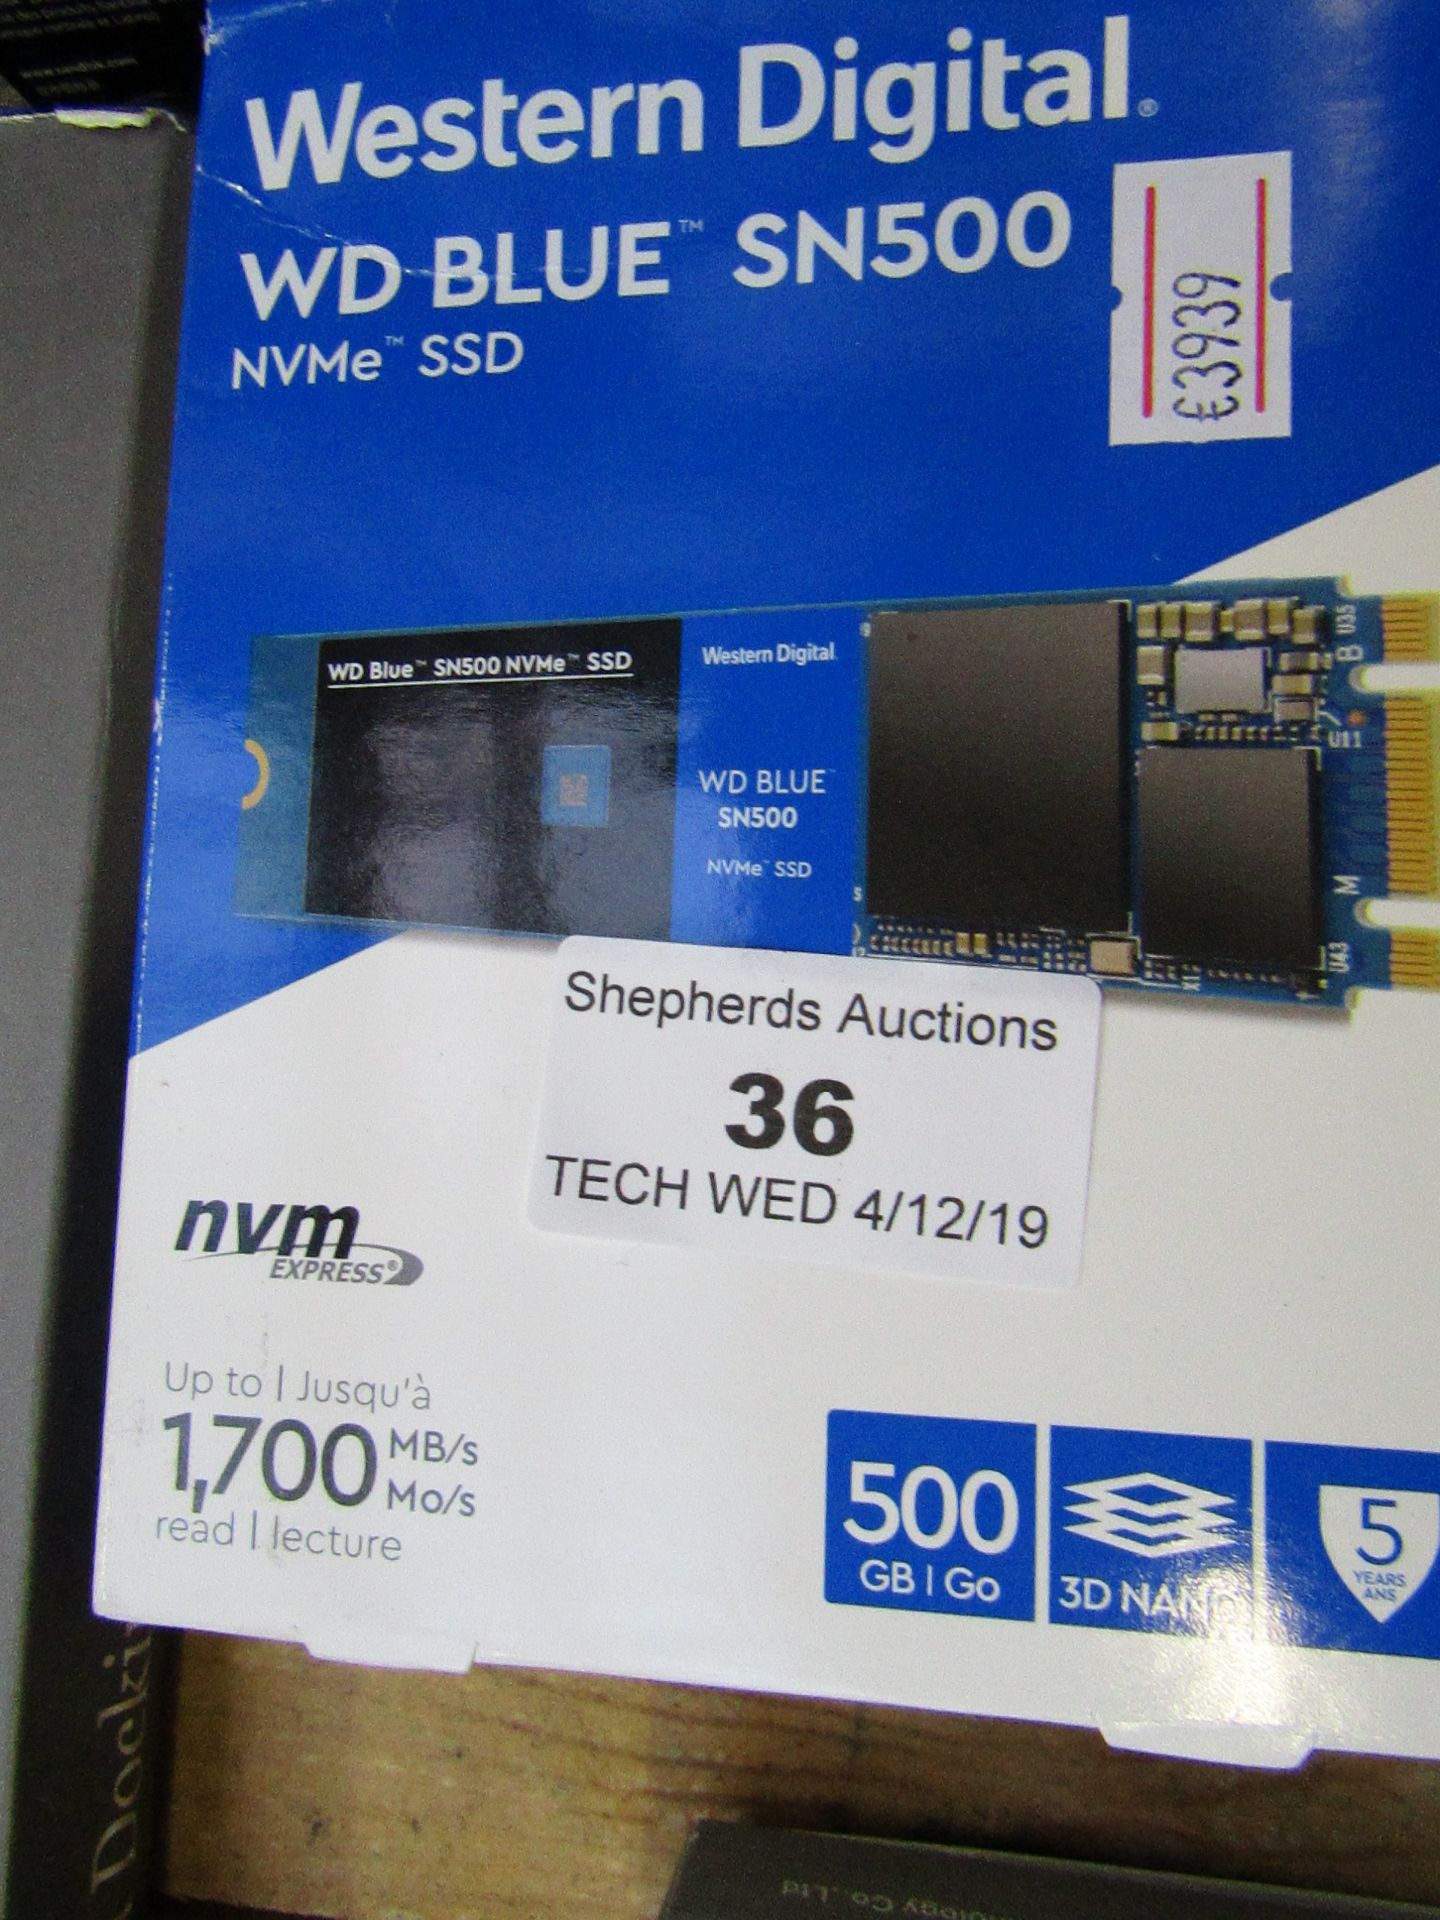 Western Digital WD Blue SN500 500BB SSD, boxednad unchecked.